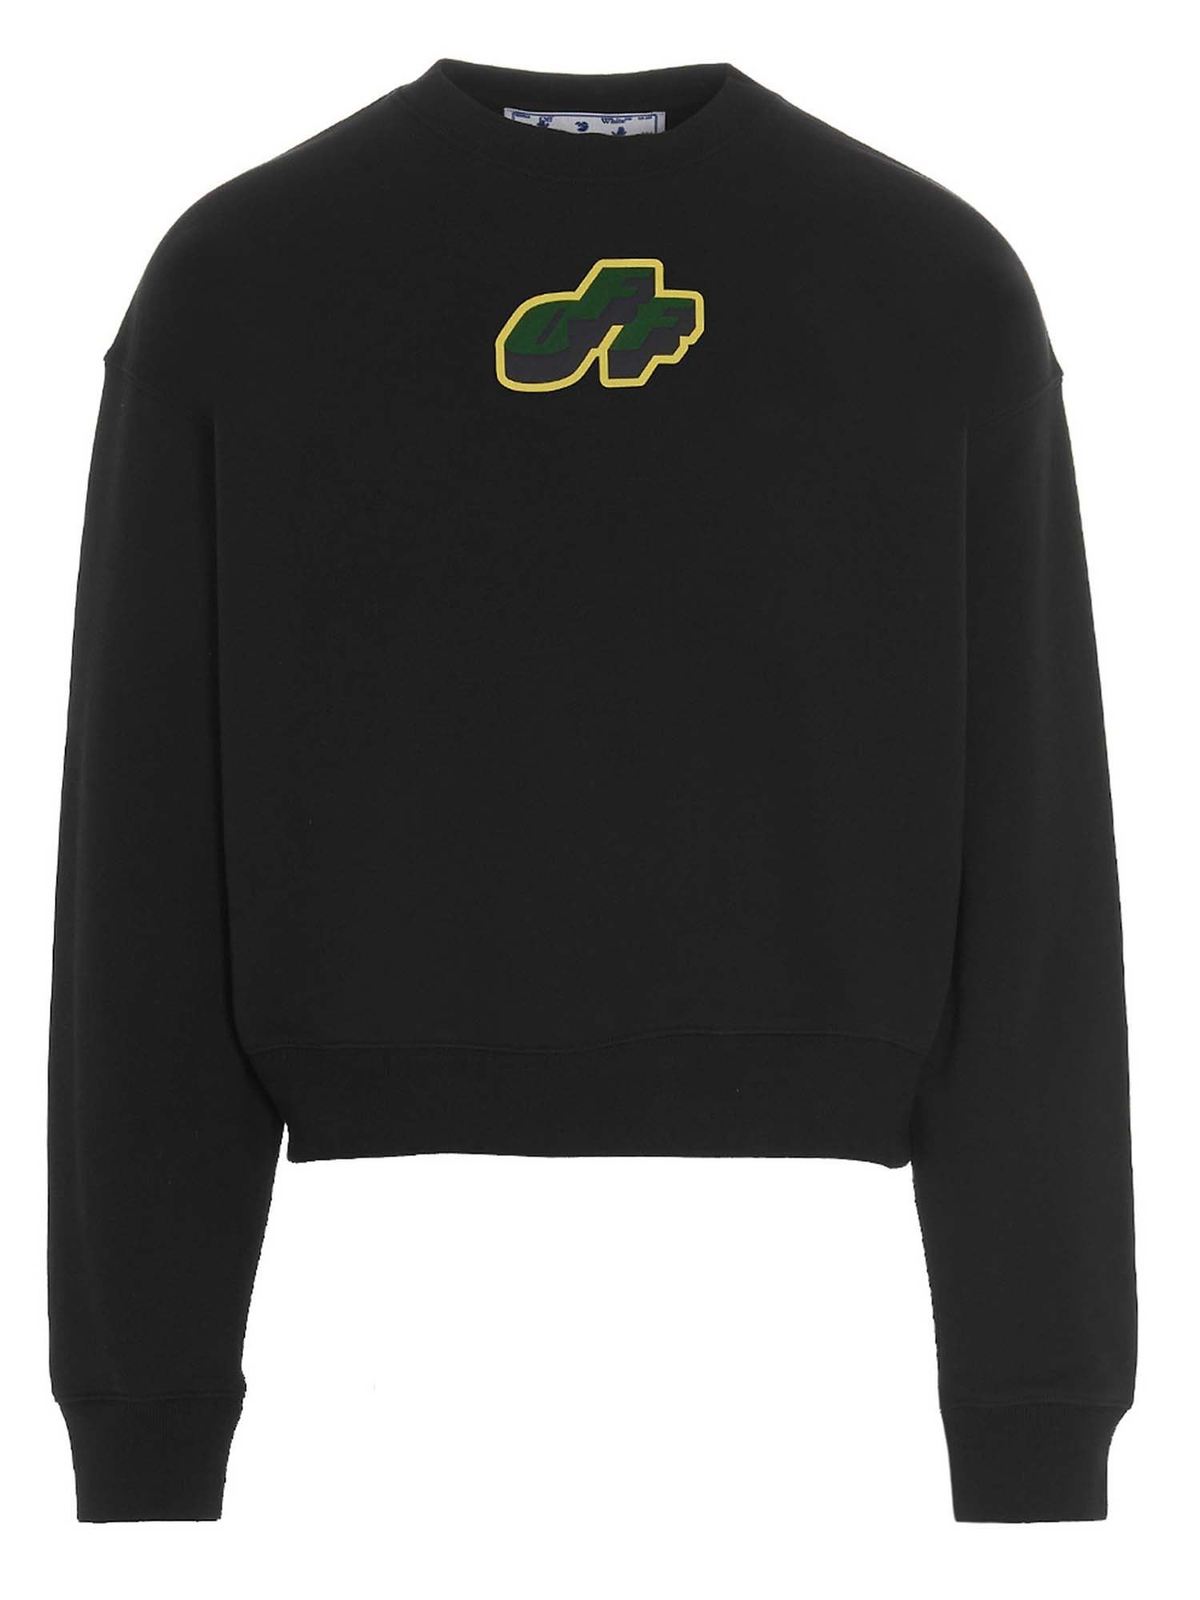 OFF-WHITE TONGUE OUT SWEATSHIRT IN BLACK